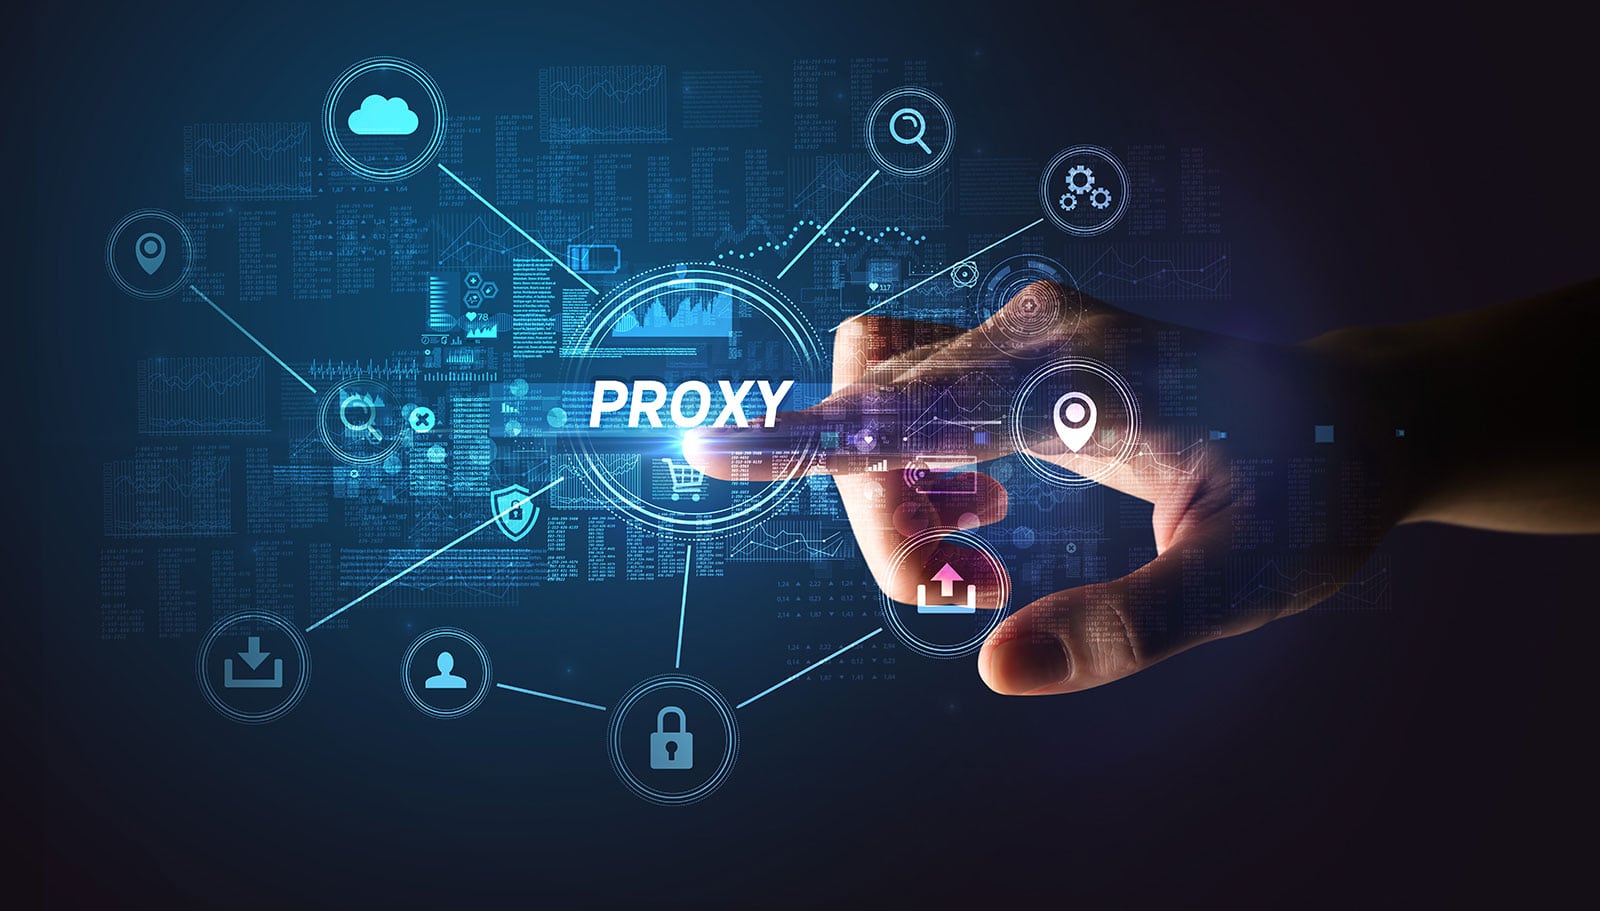 Reverse Proxy: What It Is and How It Elevates Your Website Performance